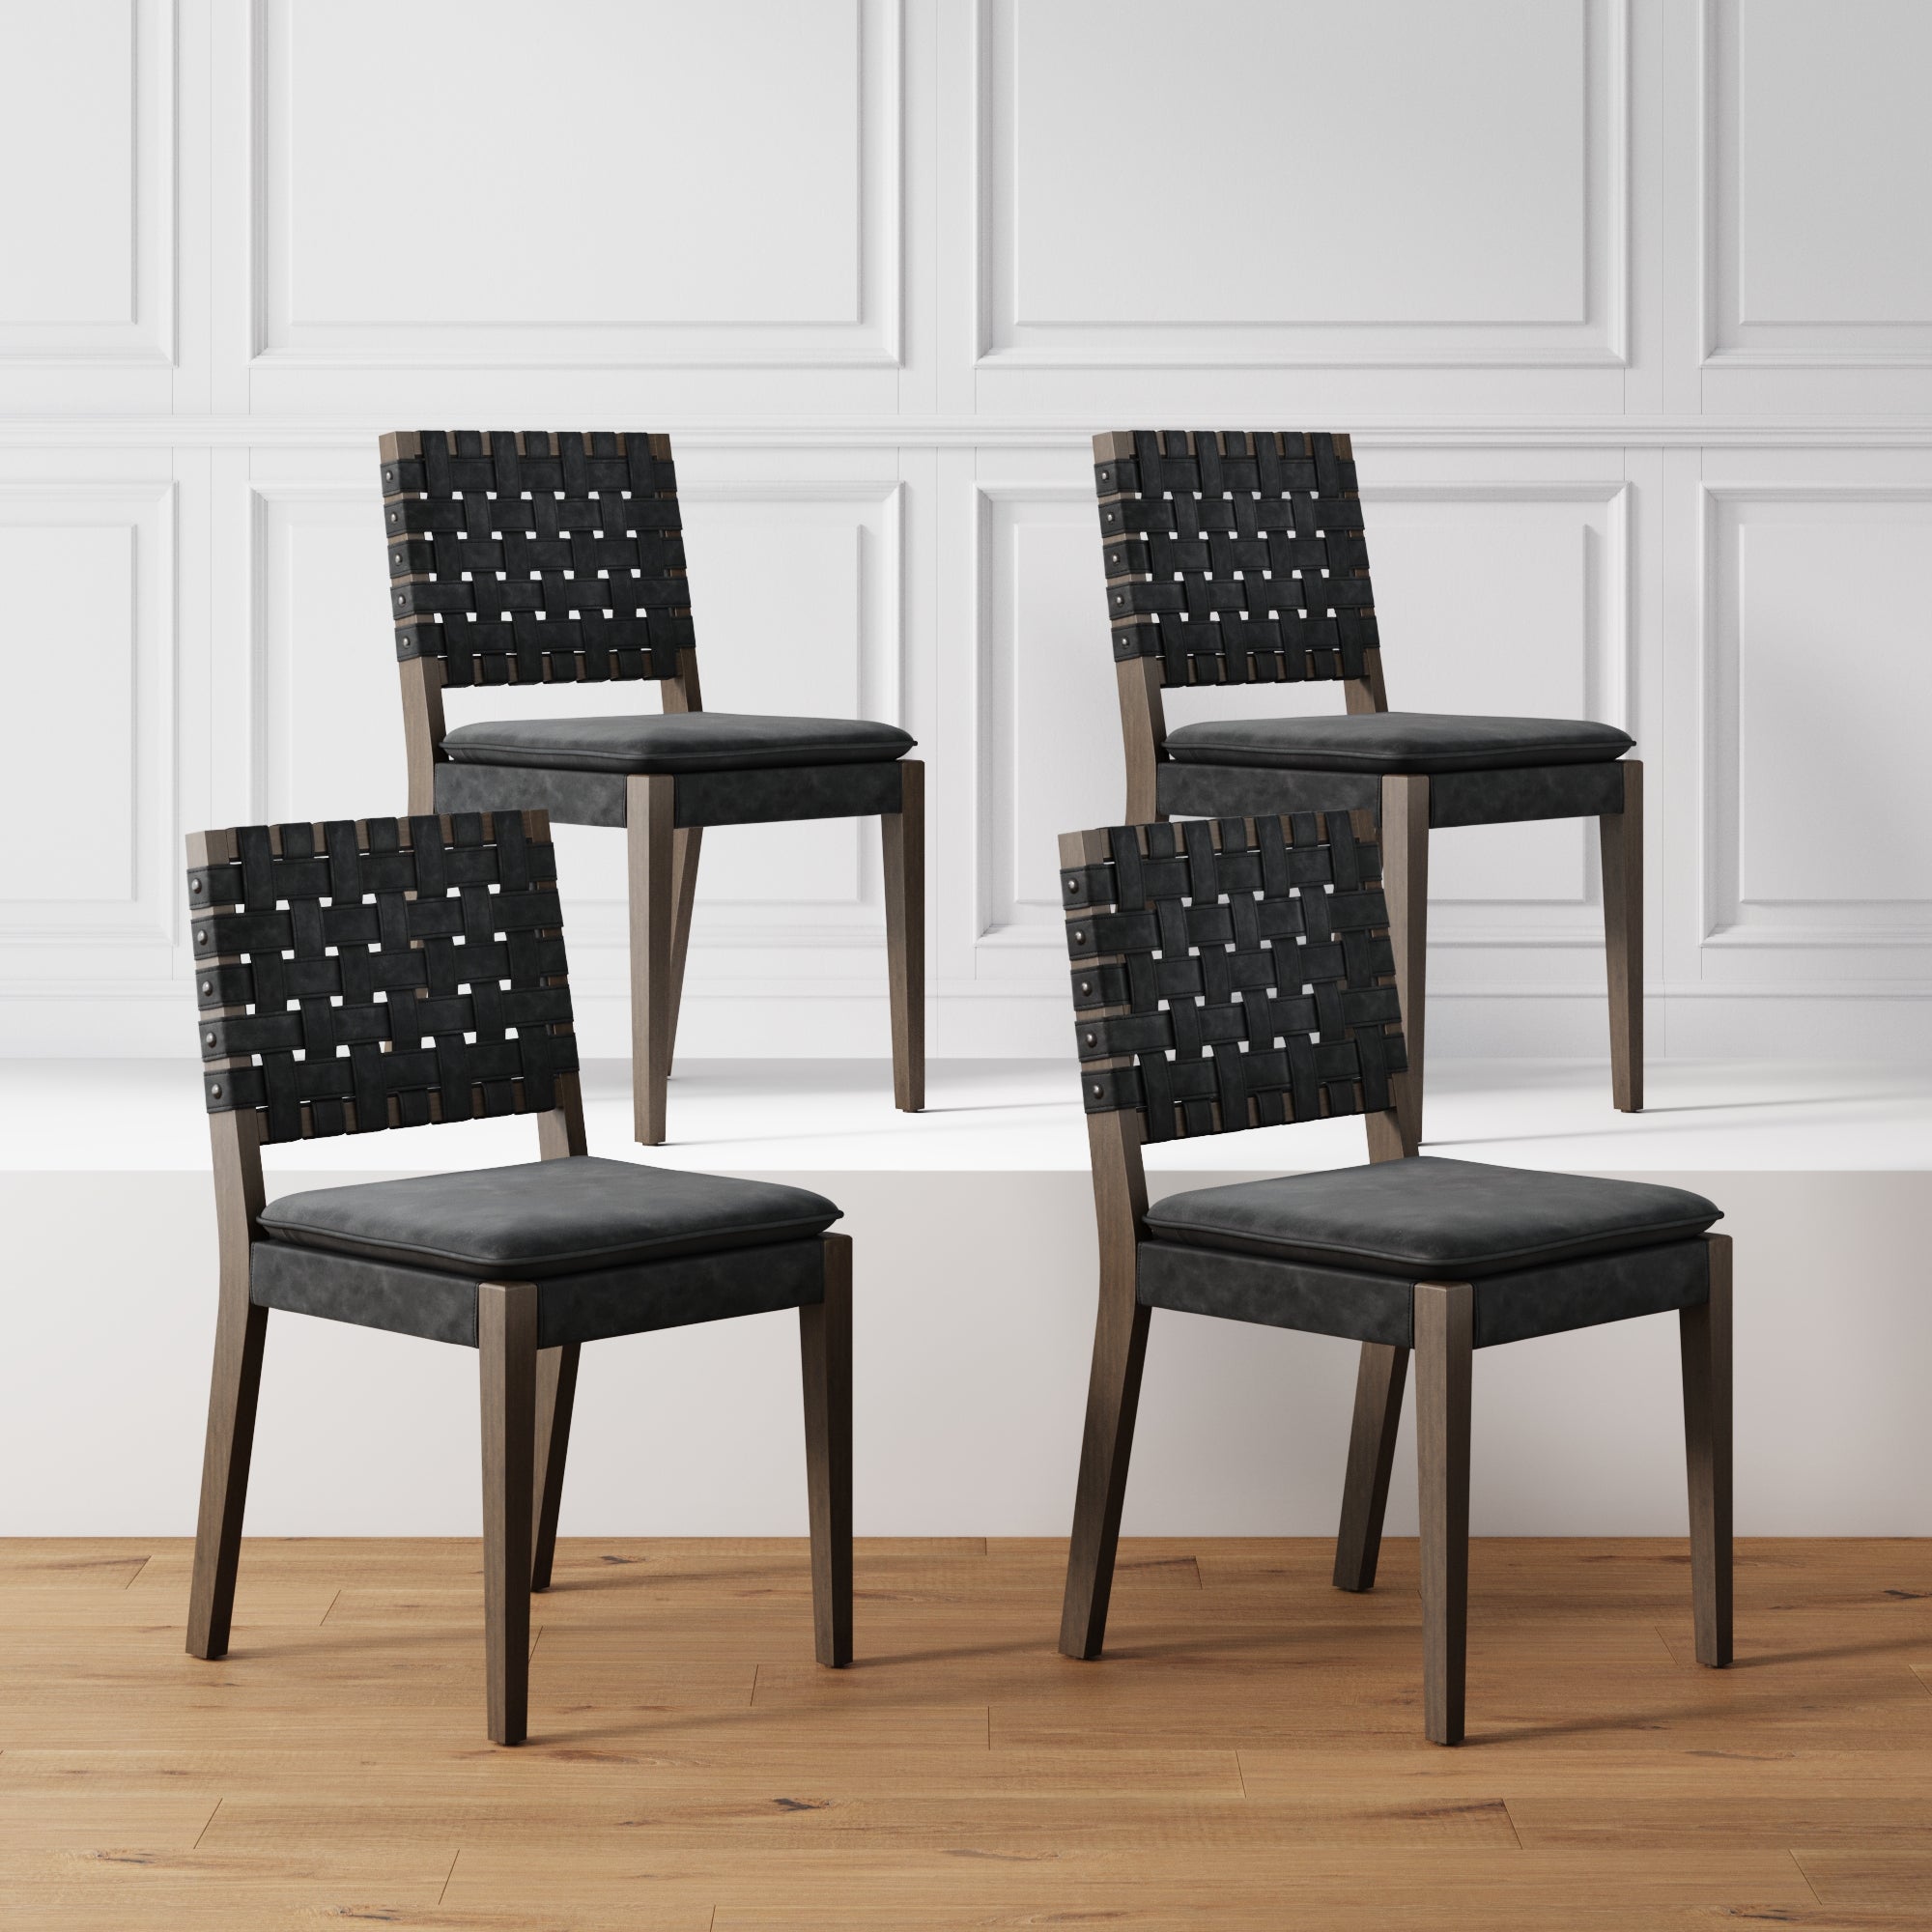 Set of 4 Faux Leather Dining Chairs Black